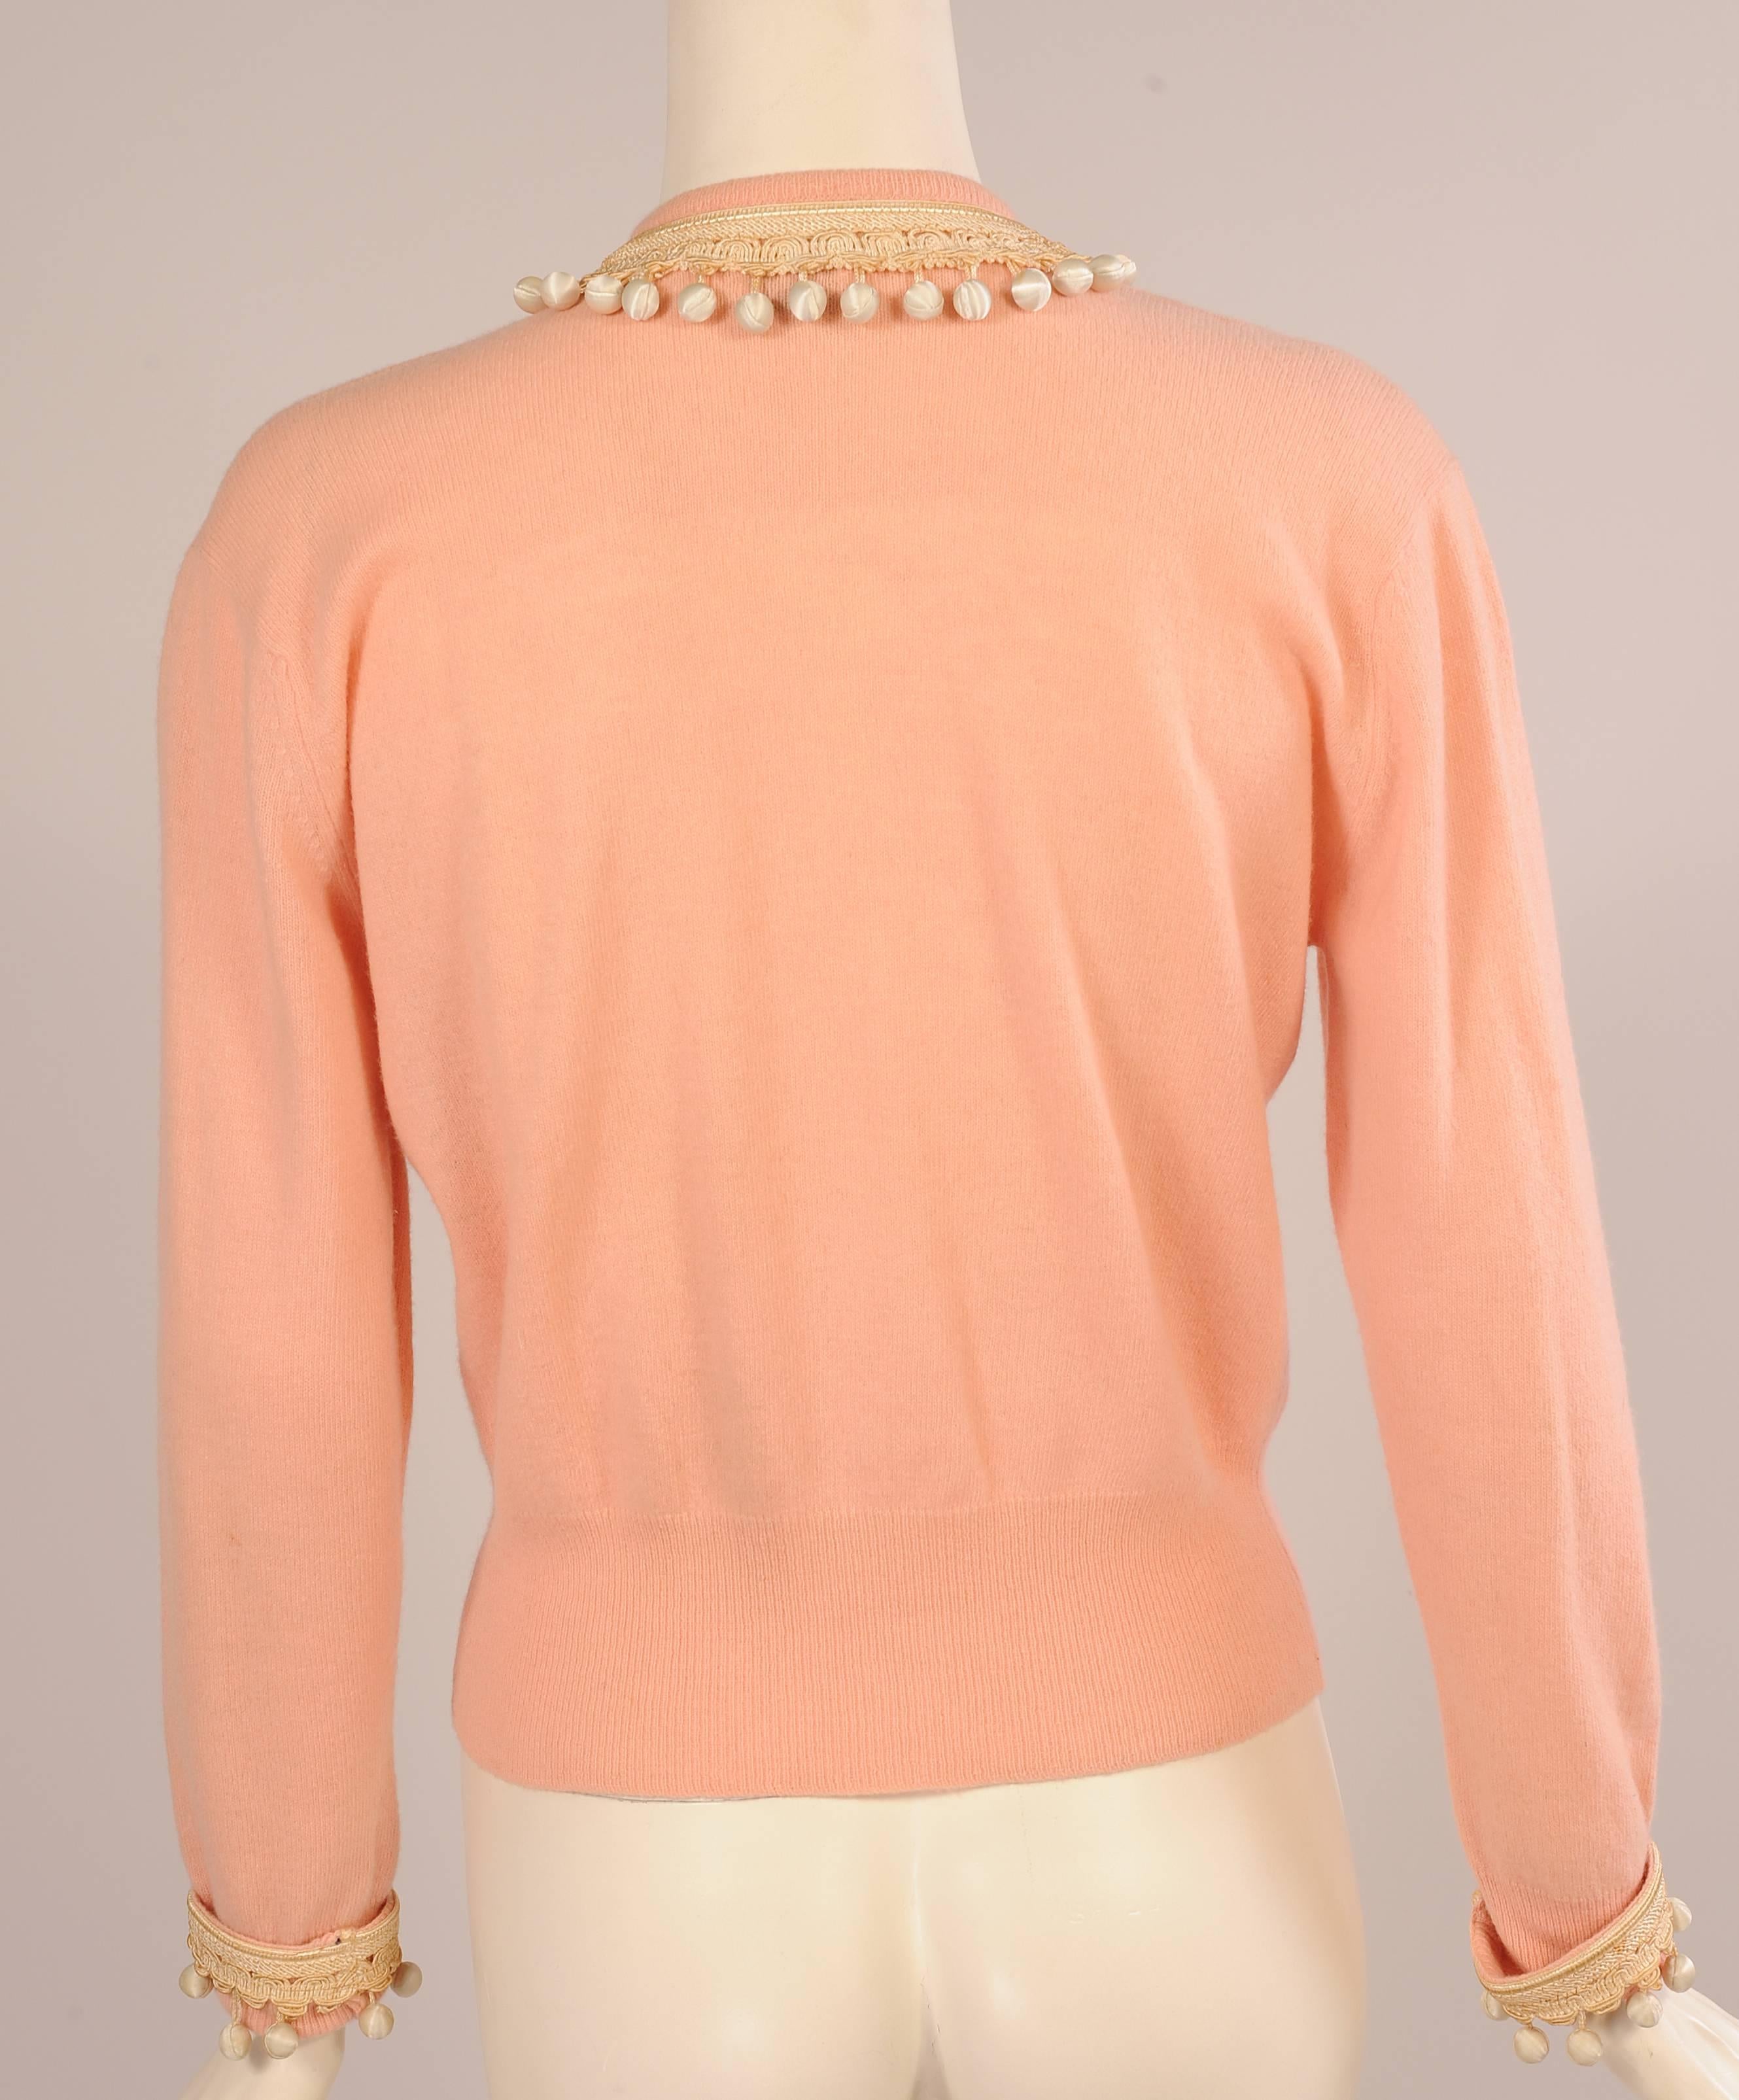 Women's Pink Cashmere Sweater with Baubles and Beads, 1950's 